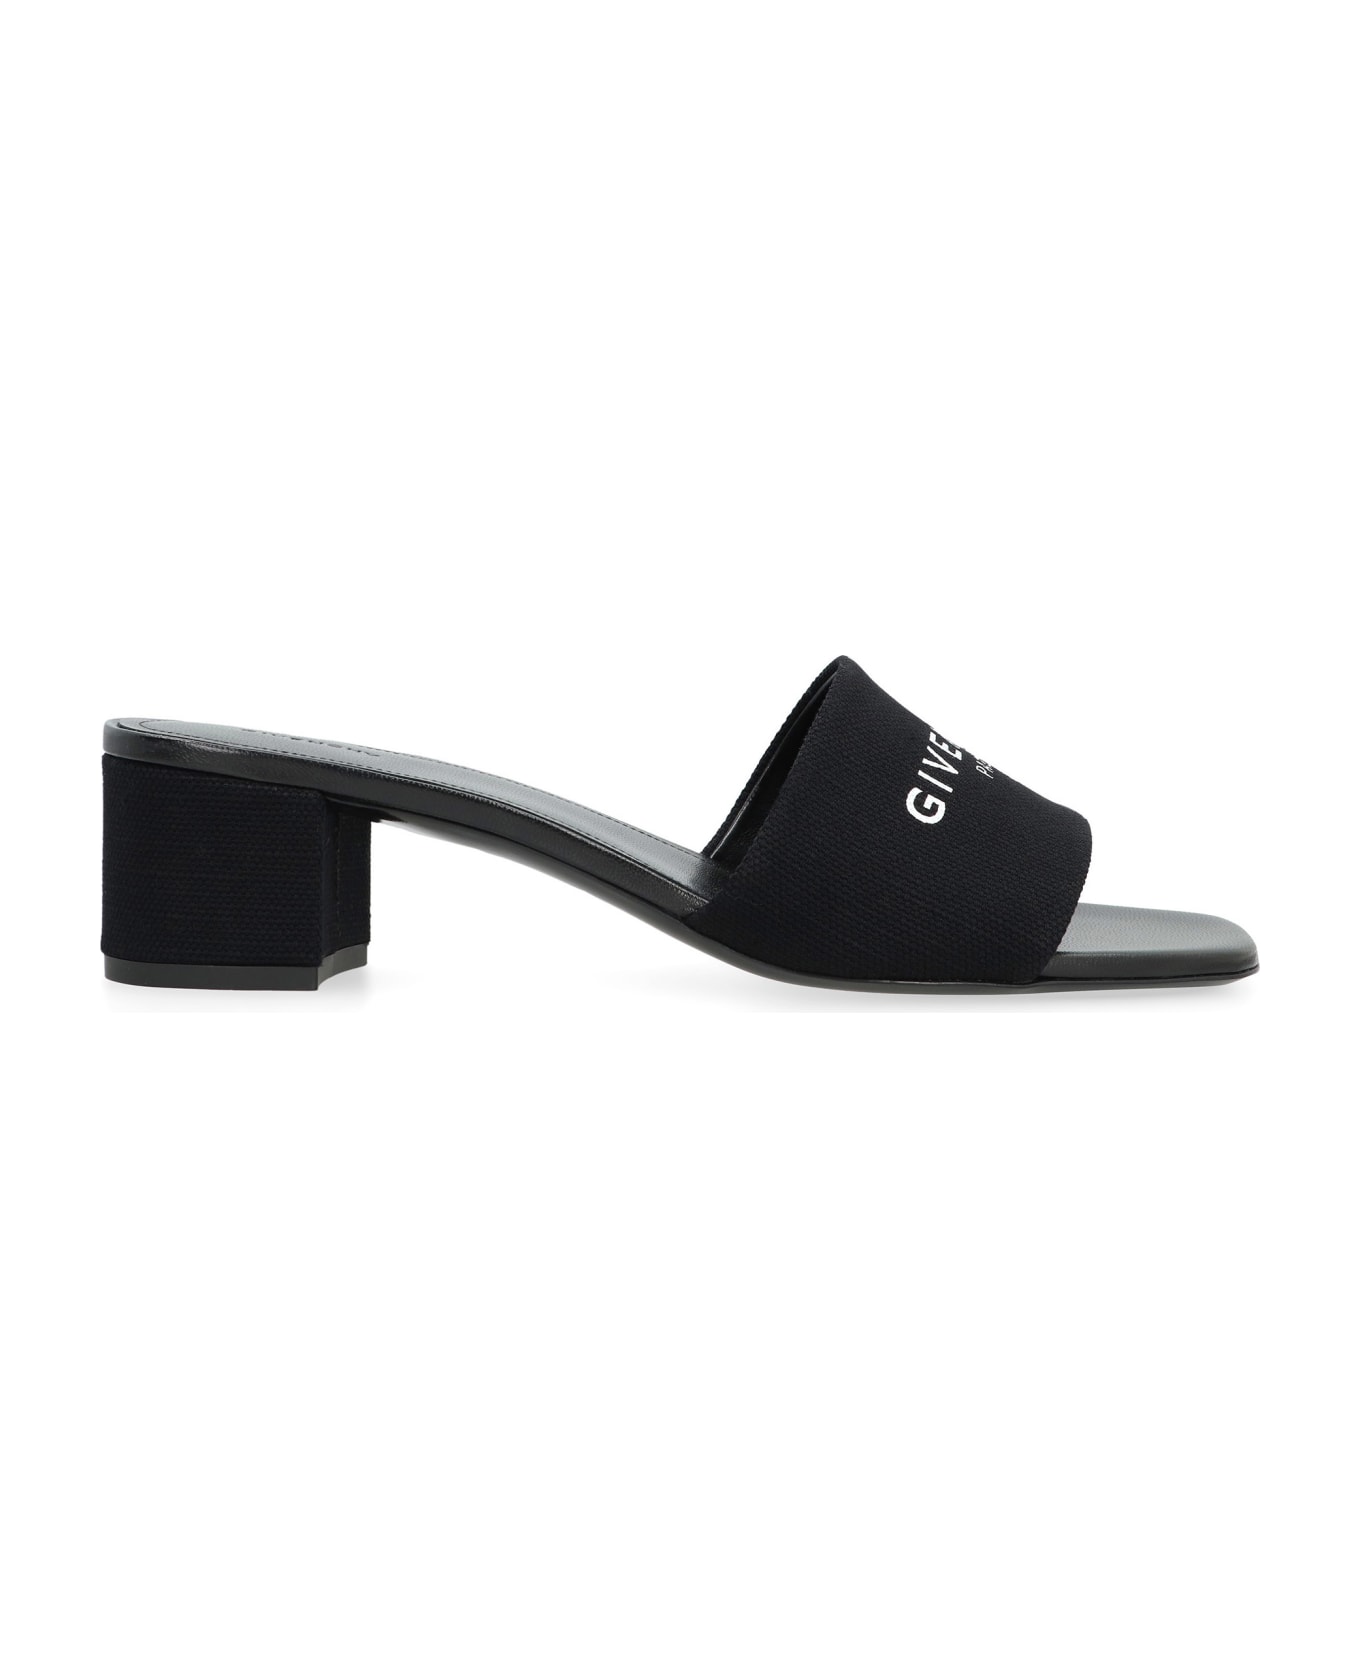 Givenchy 4g Fabric Mules - Black